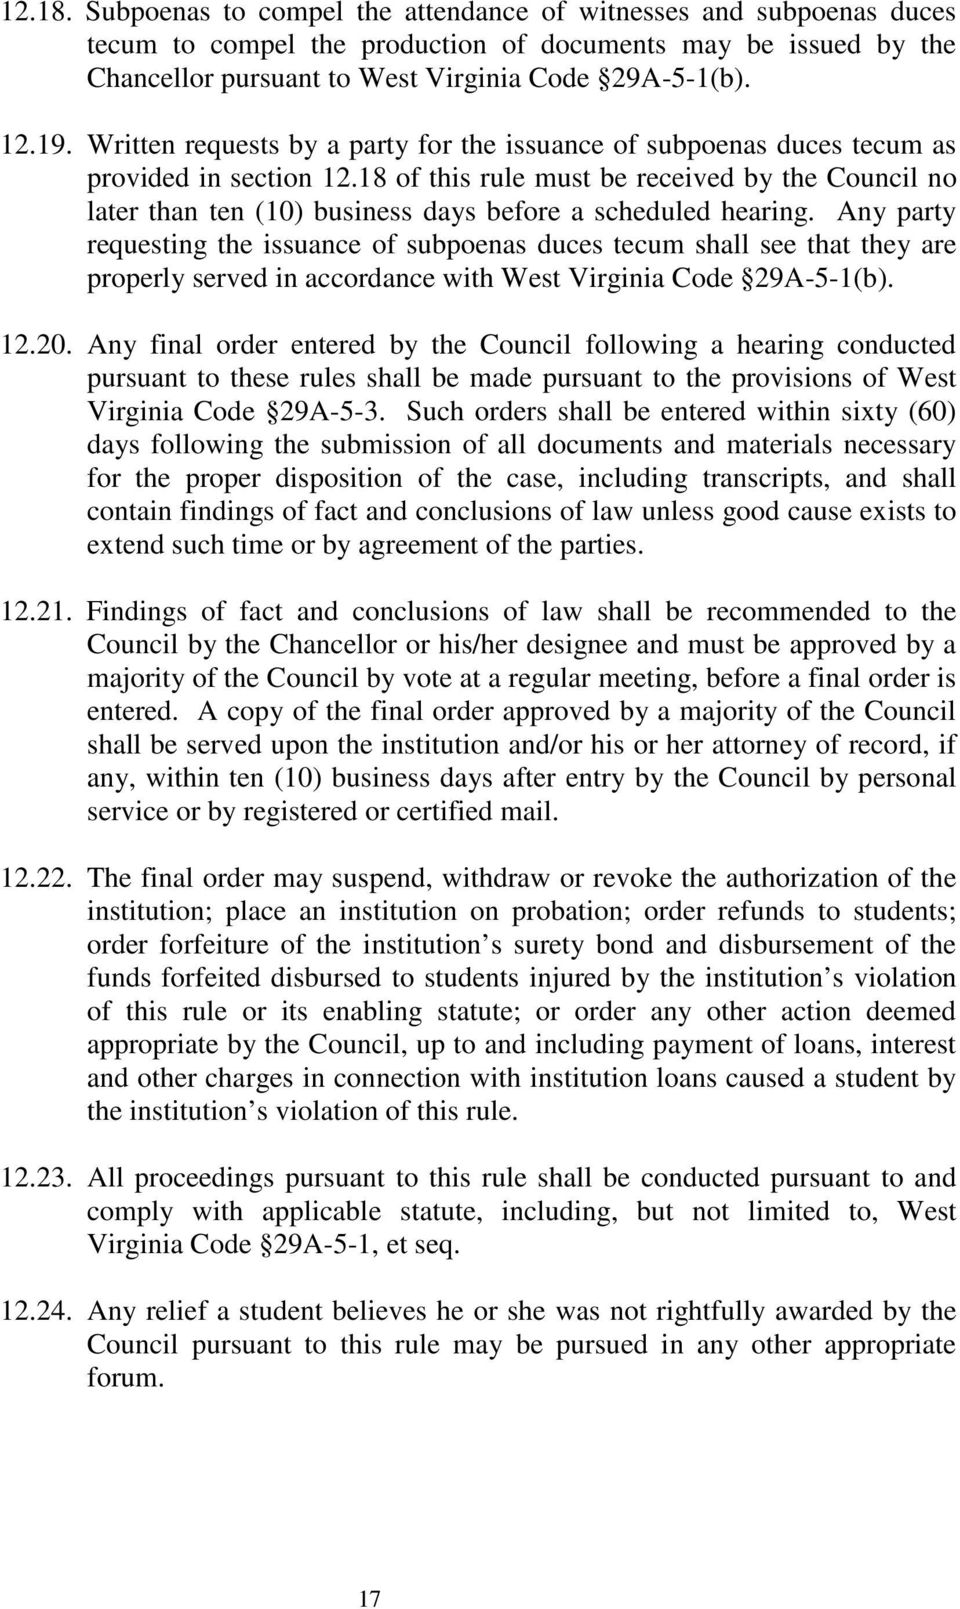 18 of this rule must be received by the Council no later than ten (10) business days before a scheduled hearing.